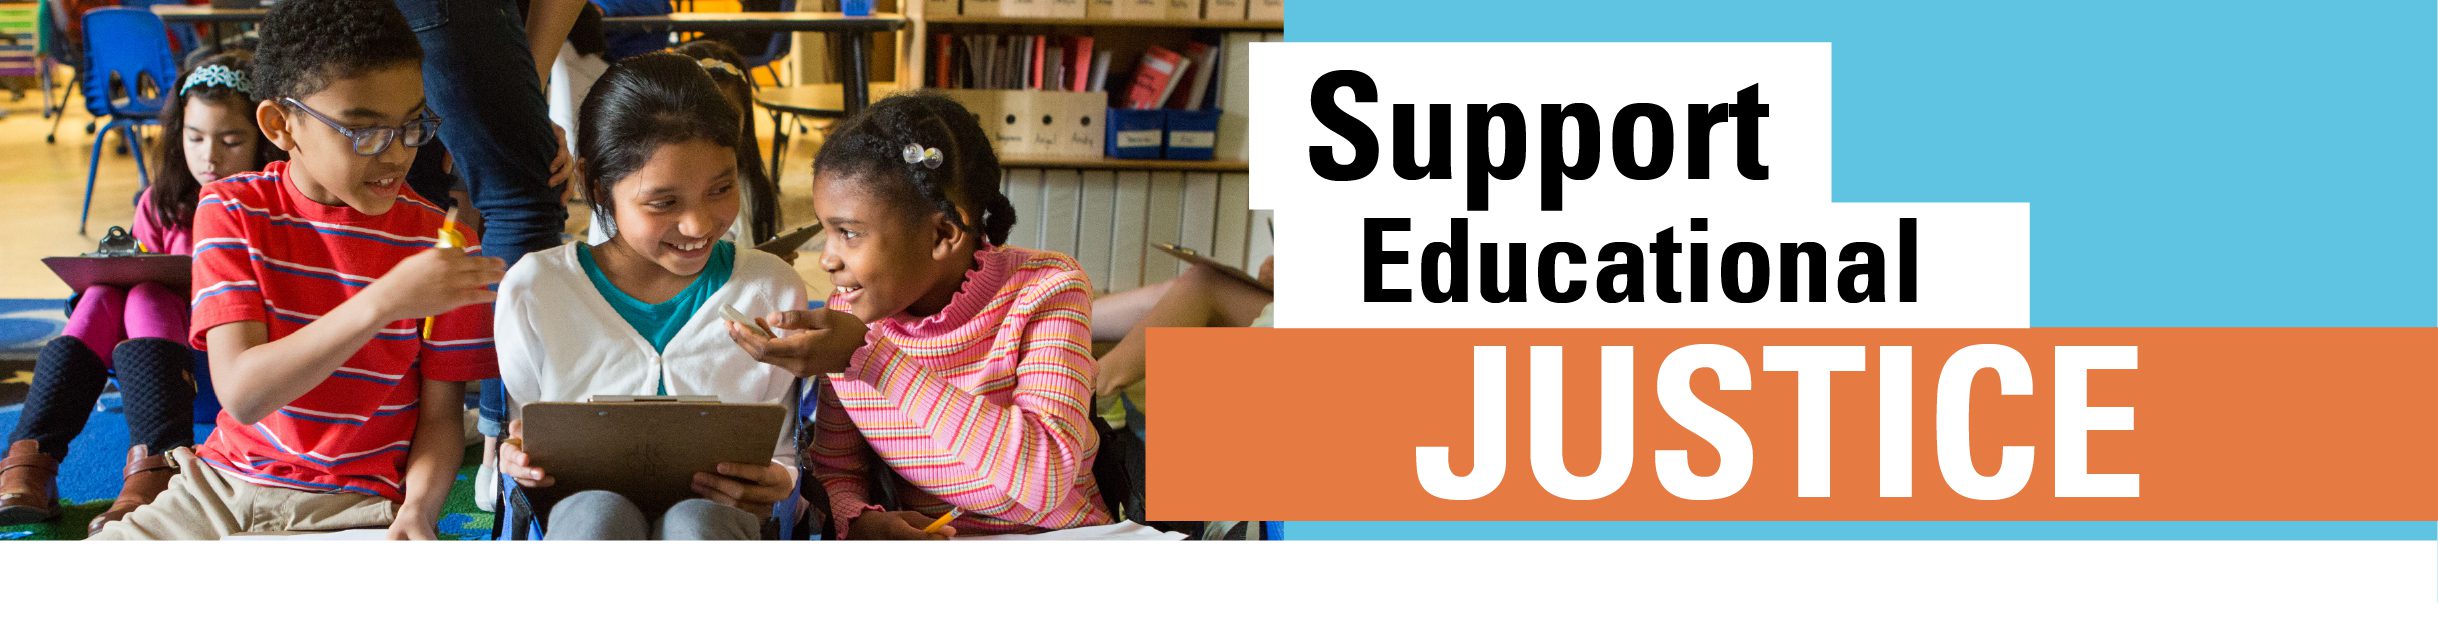 A banner graphic with three school aged kids clustered together that reads "Support Educational Justice"